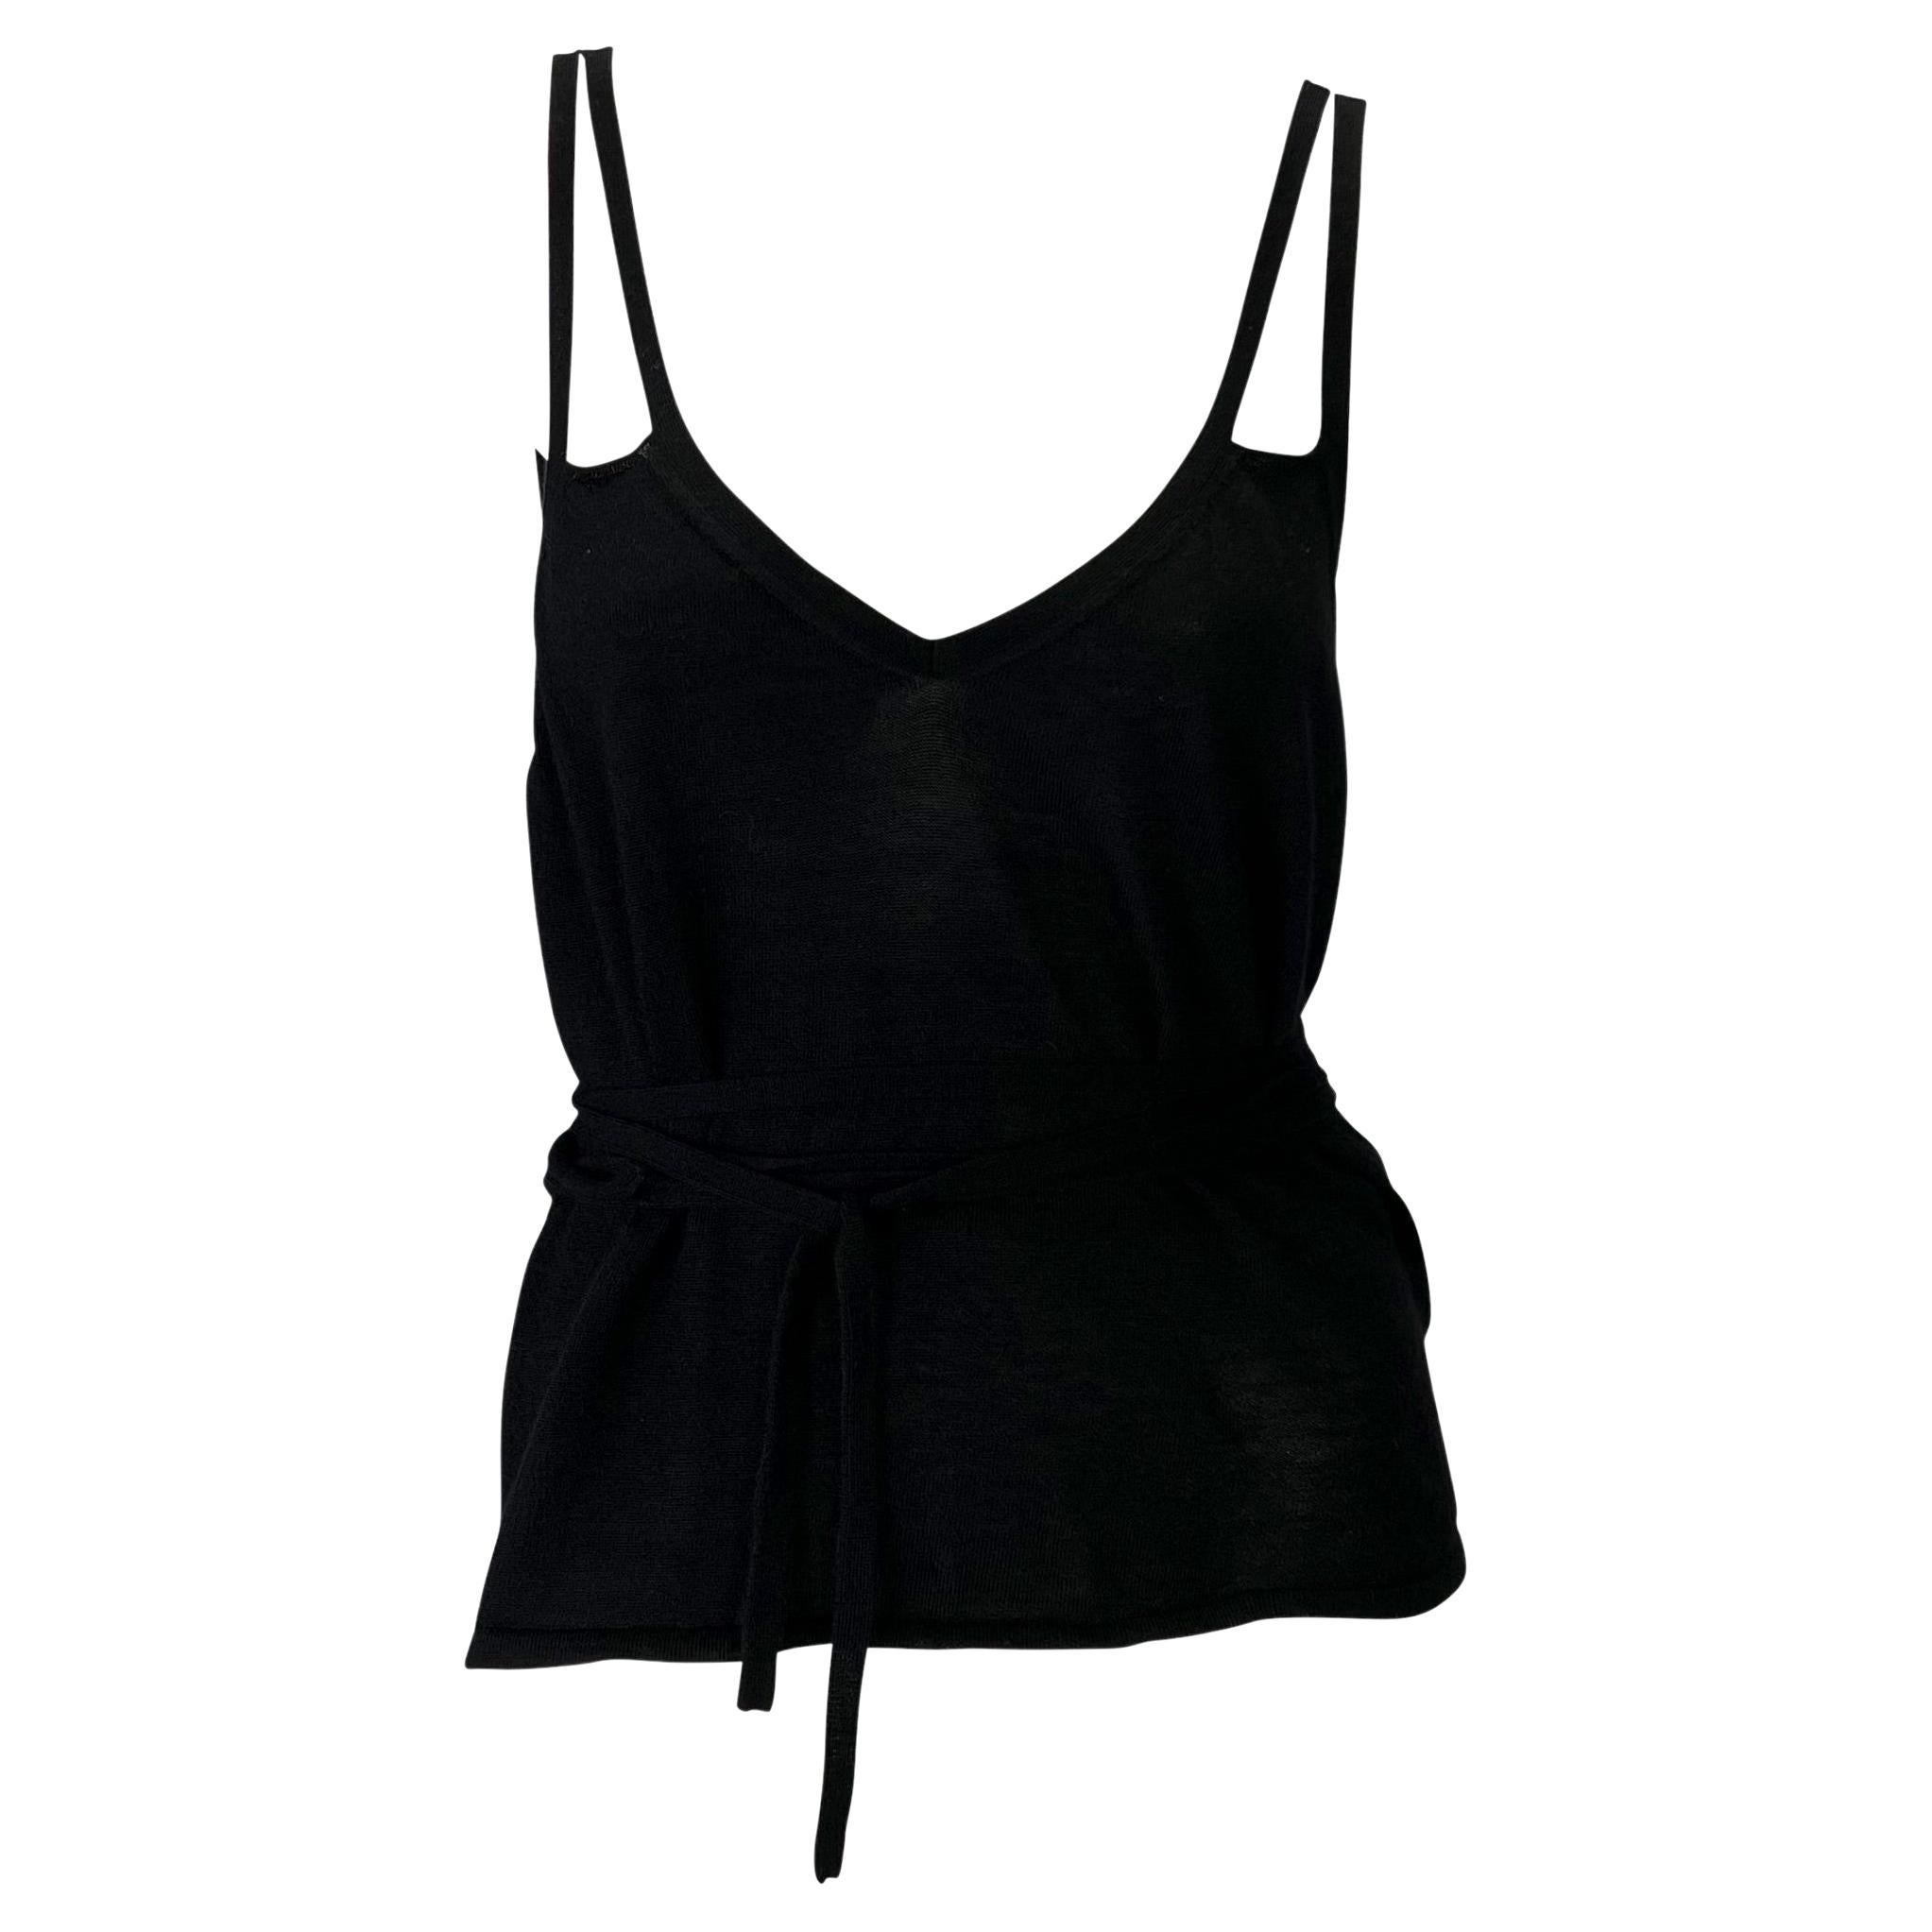 NWT Late 1990s Gucci by Tom Ford Cashmere Knit Wrap Around Tank Black (Fin des années 1990, Tom Ford for Gucci)